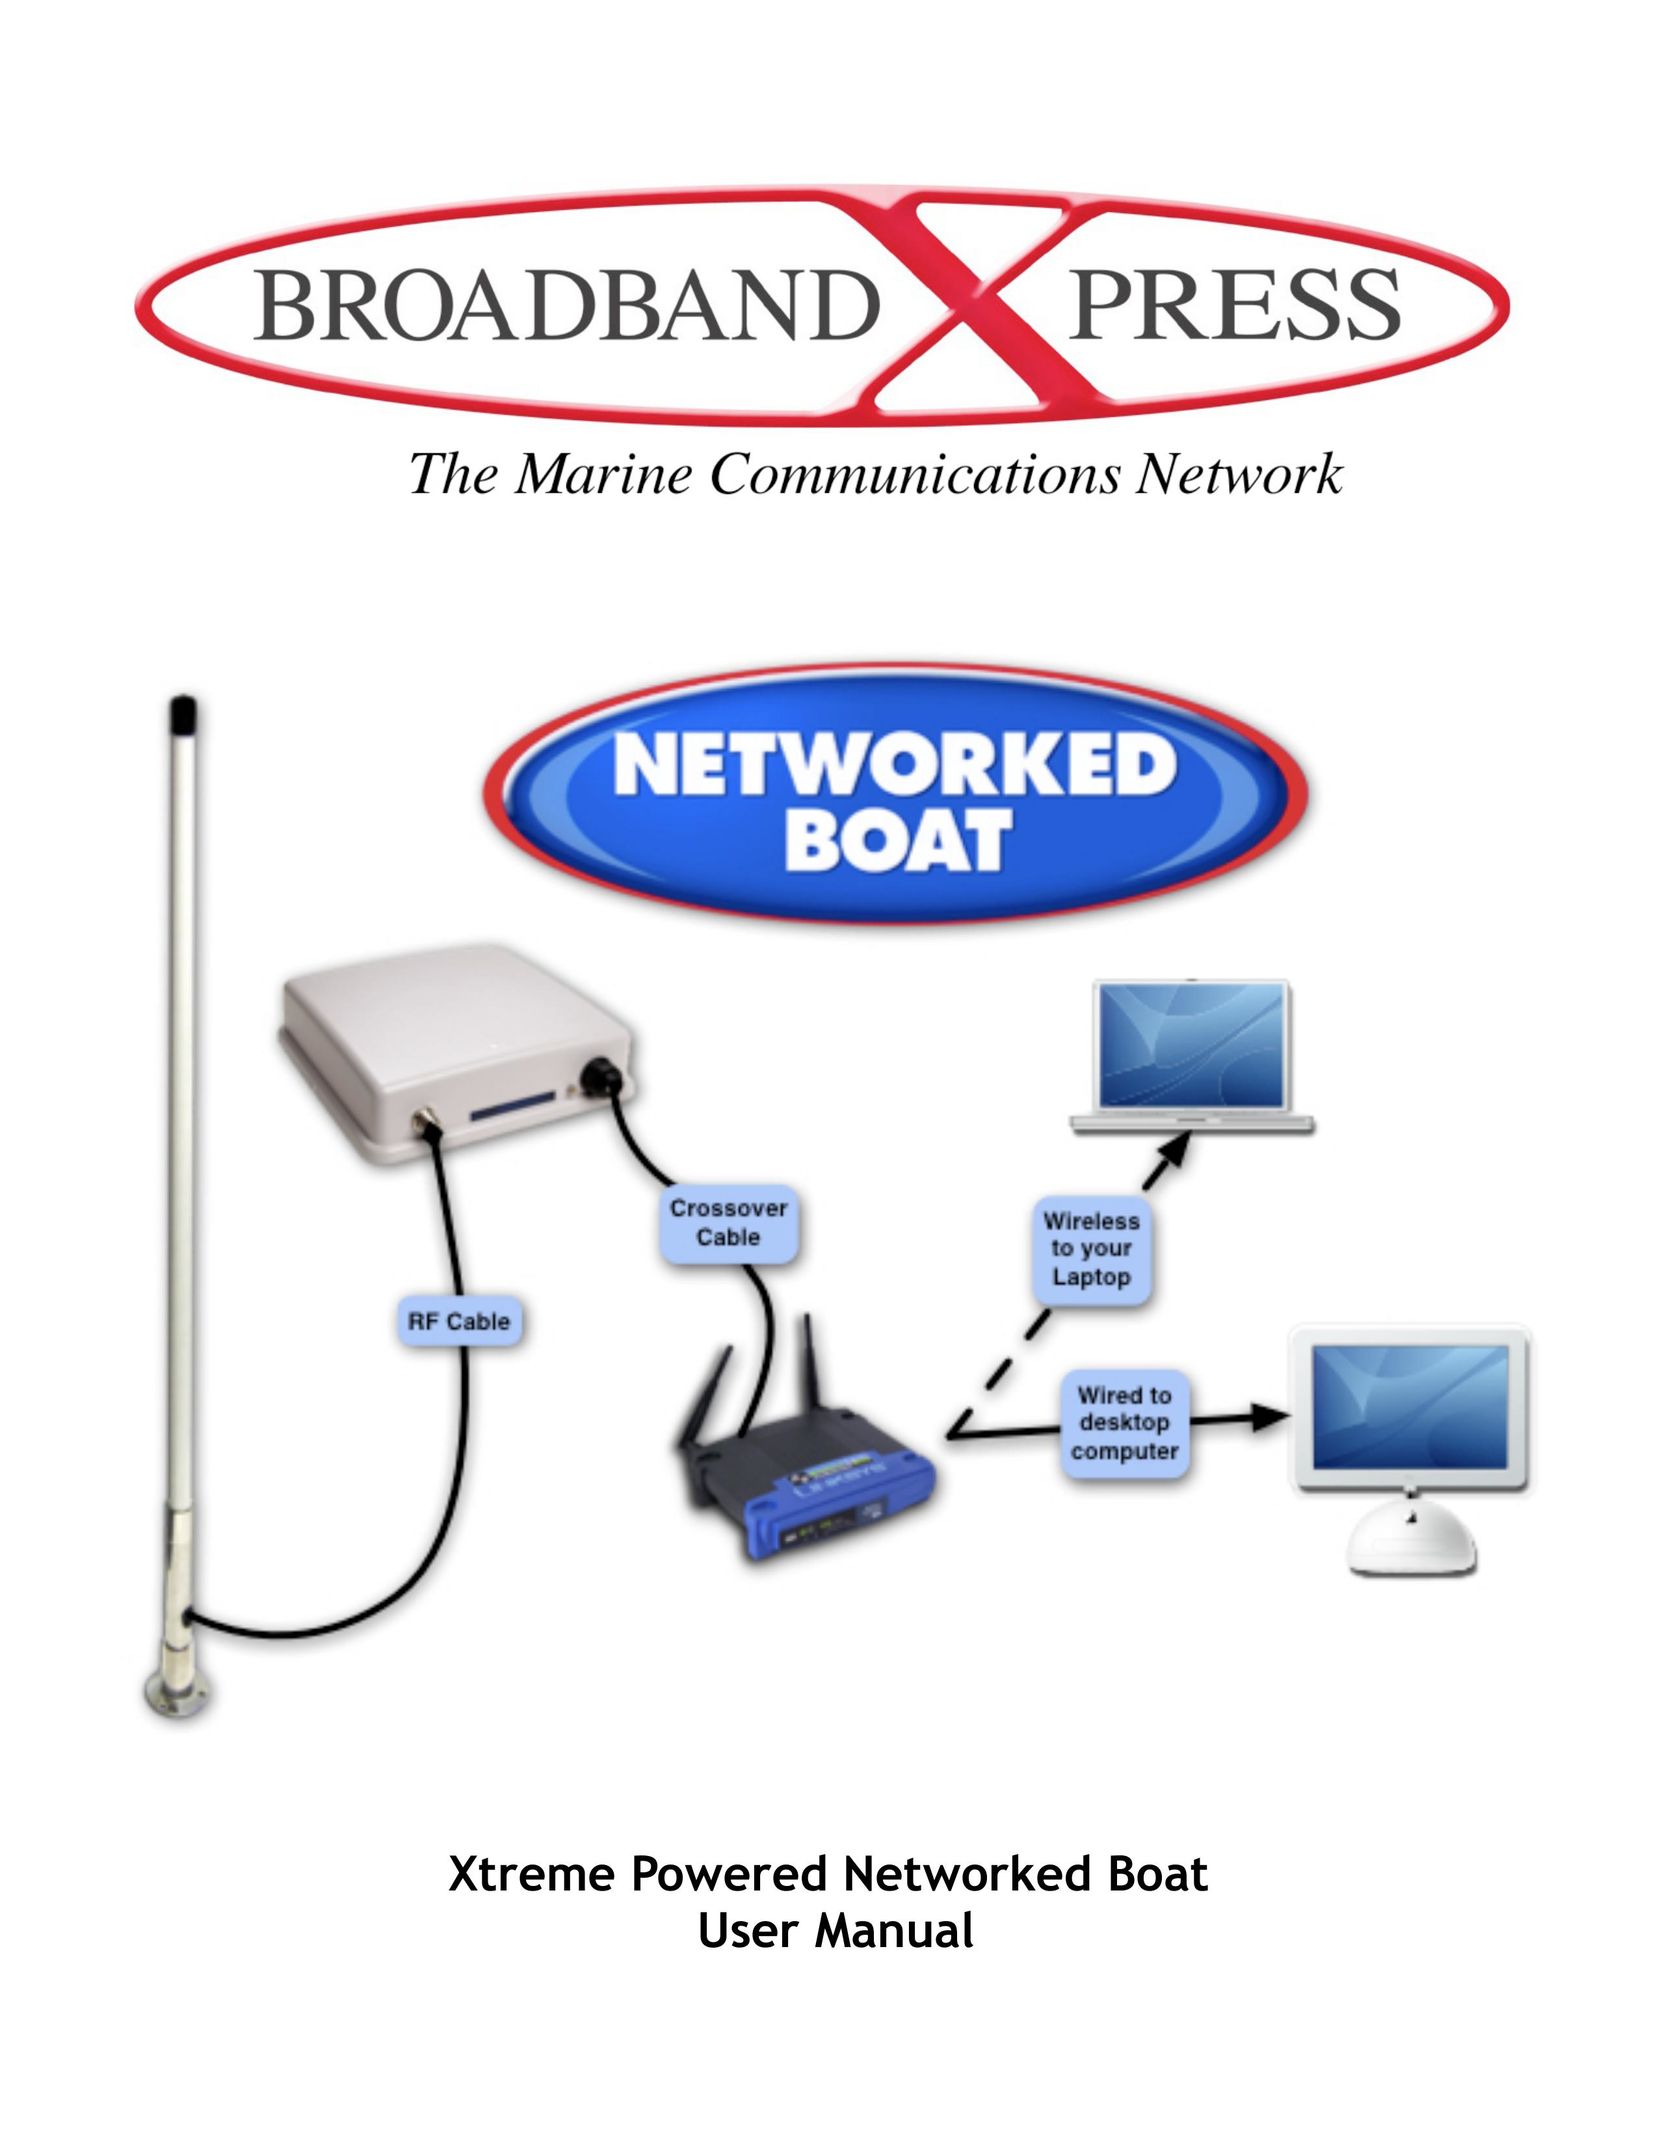 Broadband Products Networked Boat Network Router User Manual